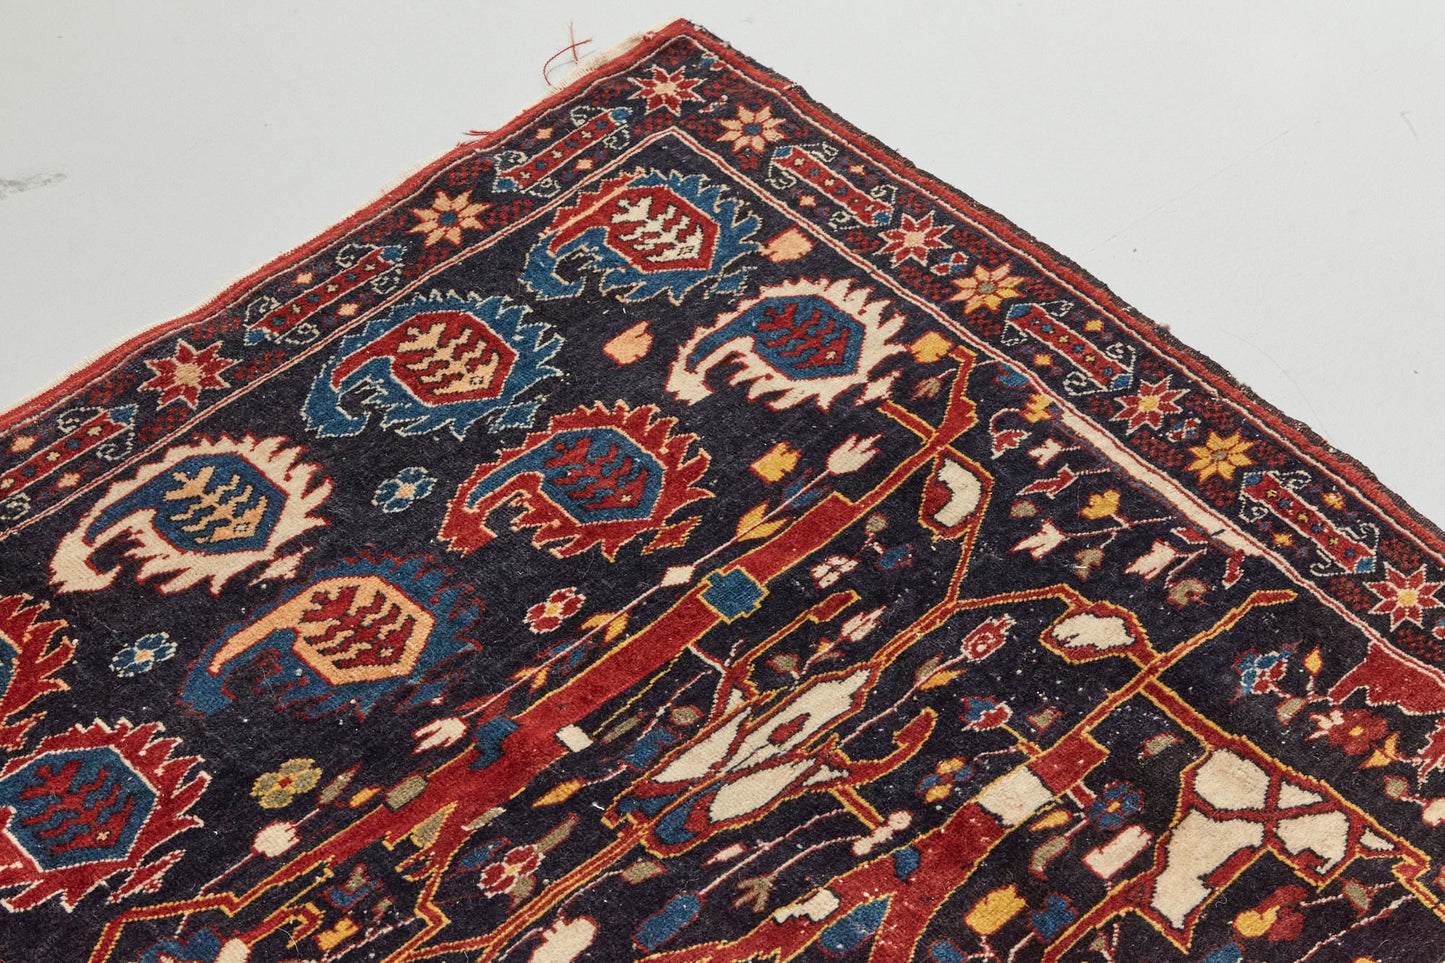 Corner detail of Antique Bidjar Persian Rug Sampler, hand woven with dark blue base and red, cream, gold and lighter blue shapes, beautiful piece in excellent condition for a study, bedroom or foyer rug - Available from King Kennedy Rugs Los Angeles